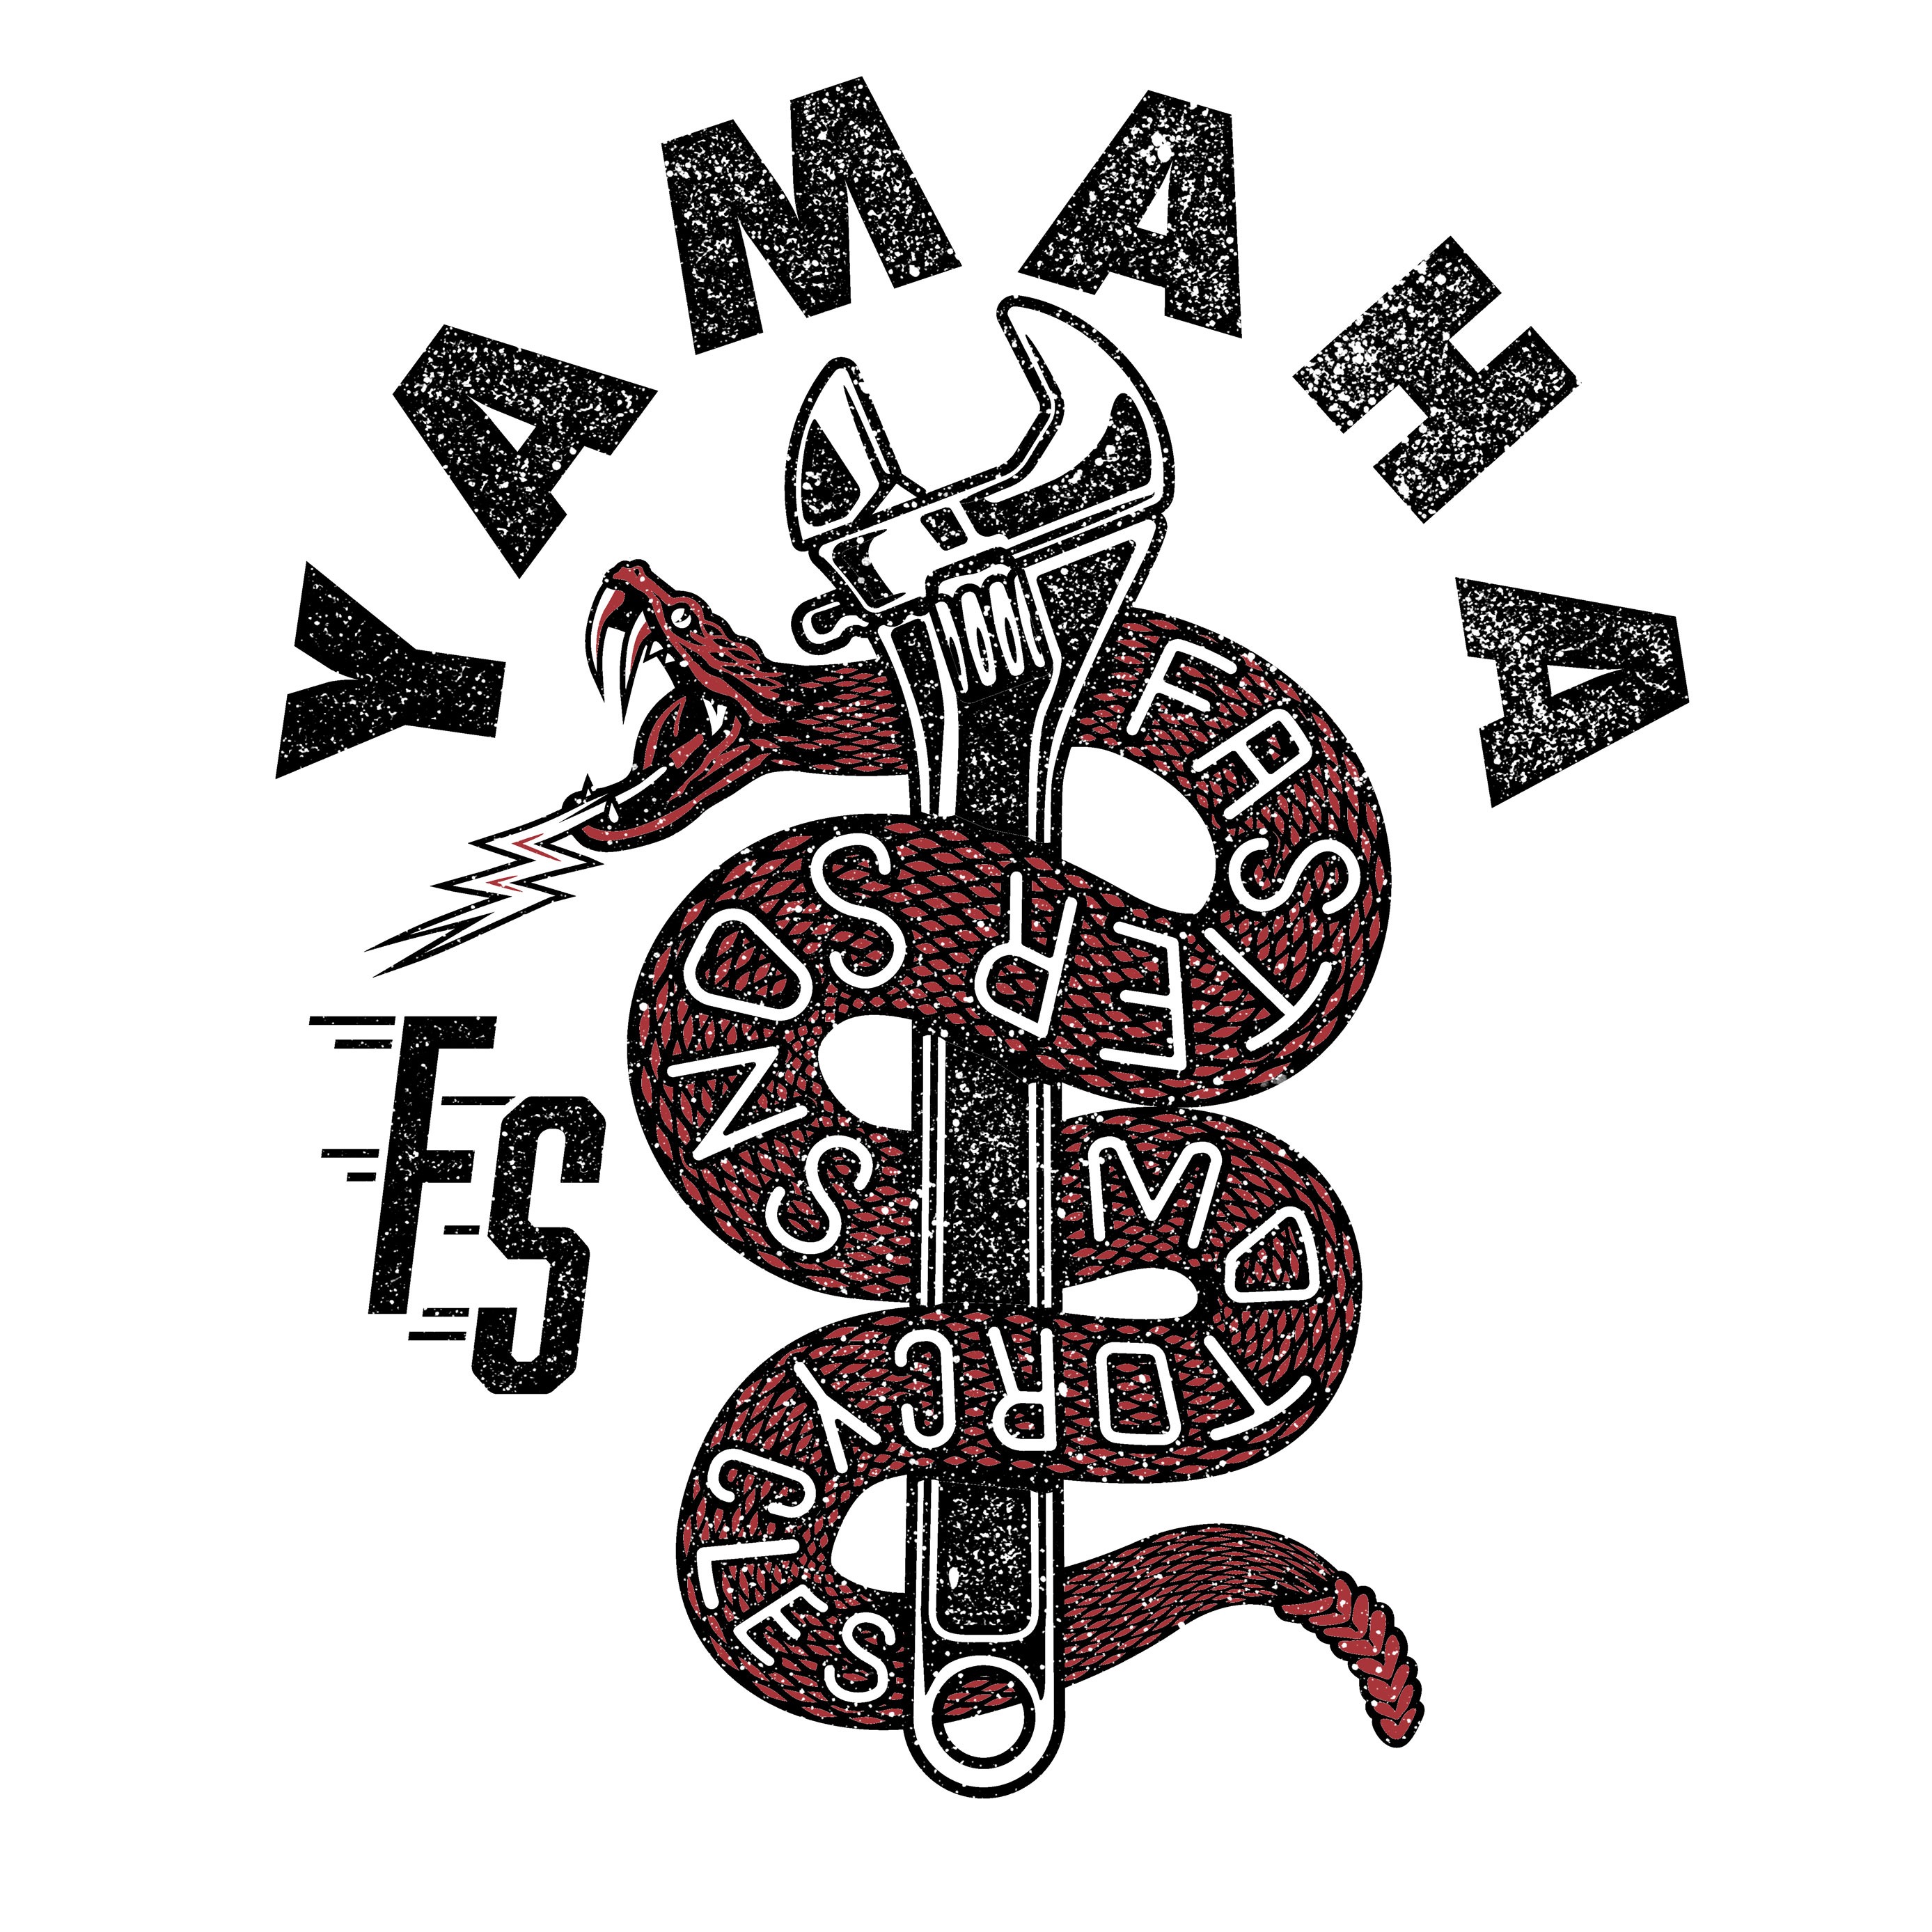 Hand drawn illustration for Yamaha Faster Sons collection